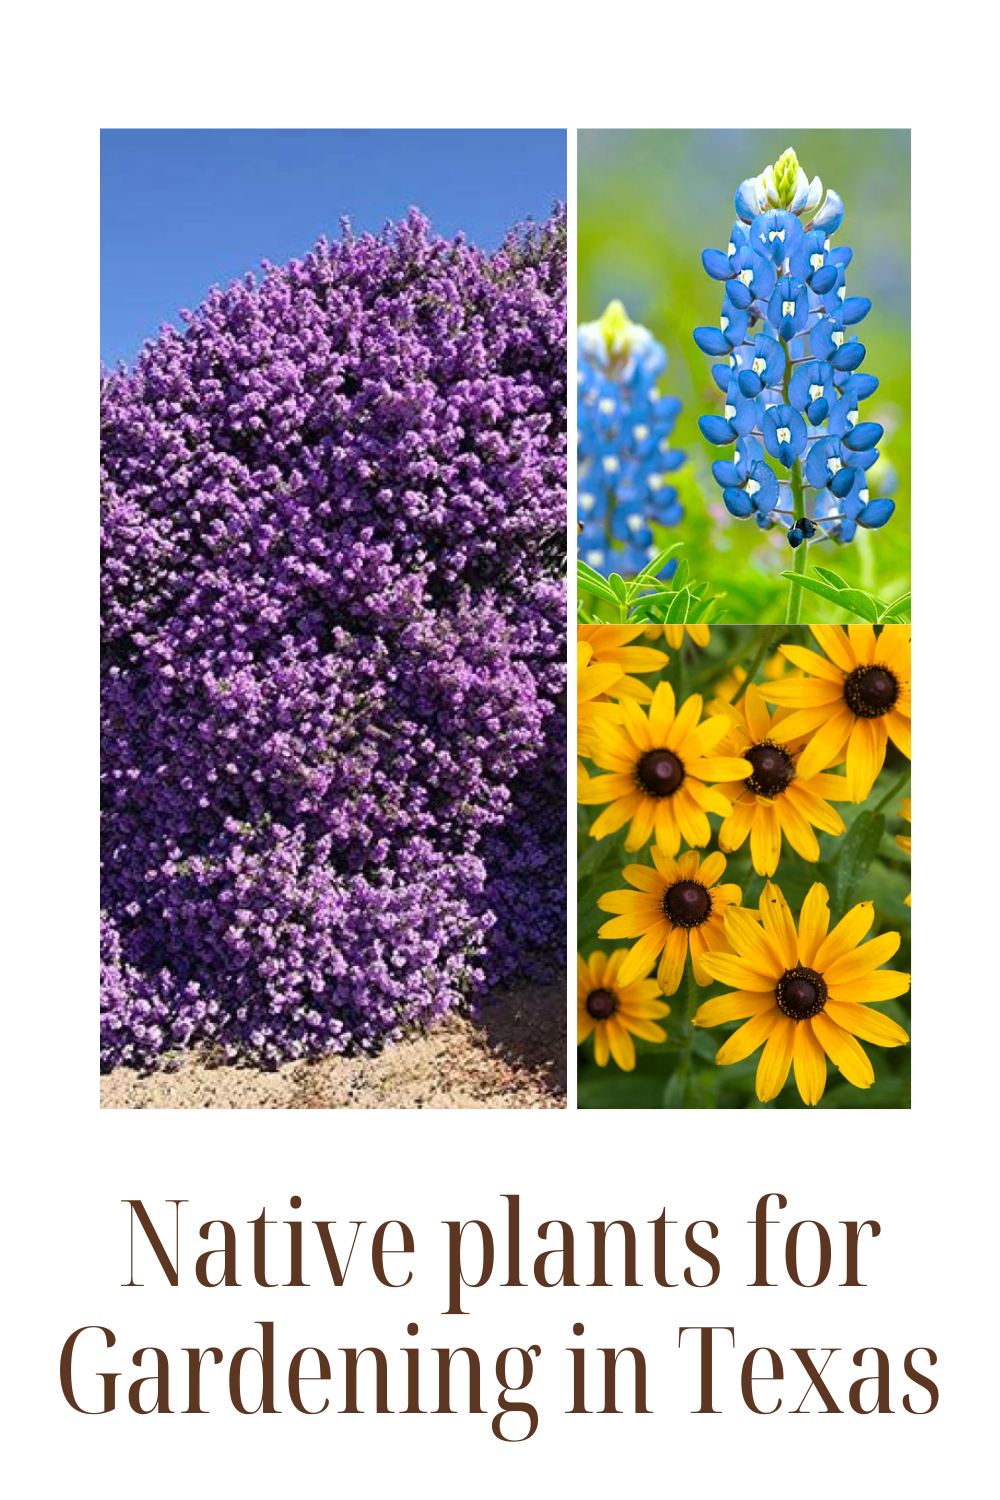 Native plants for Gardening in Texas